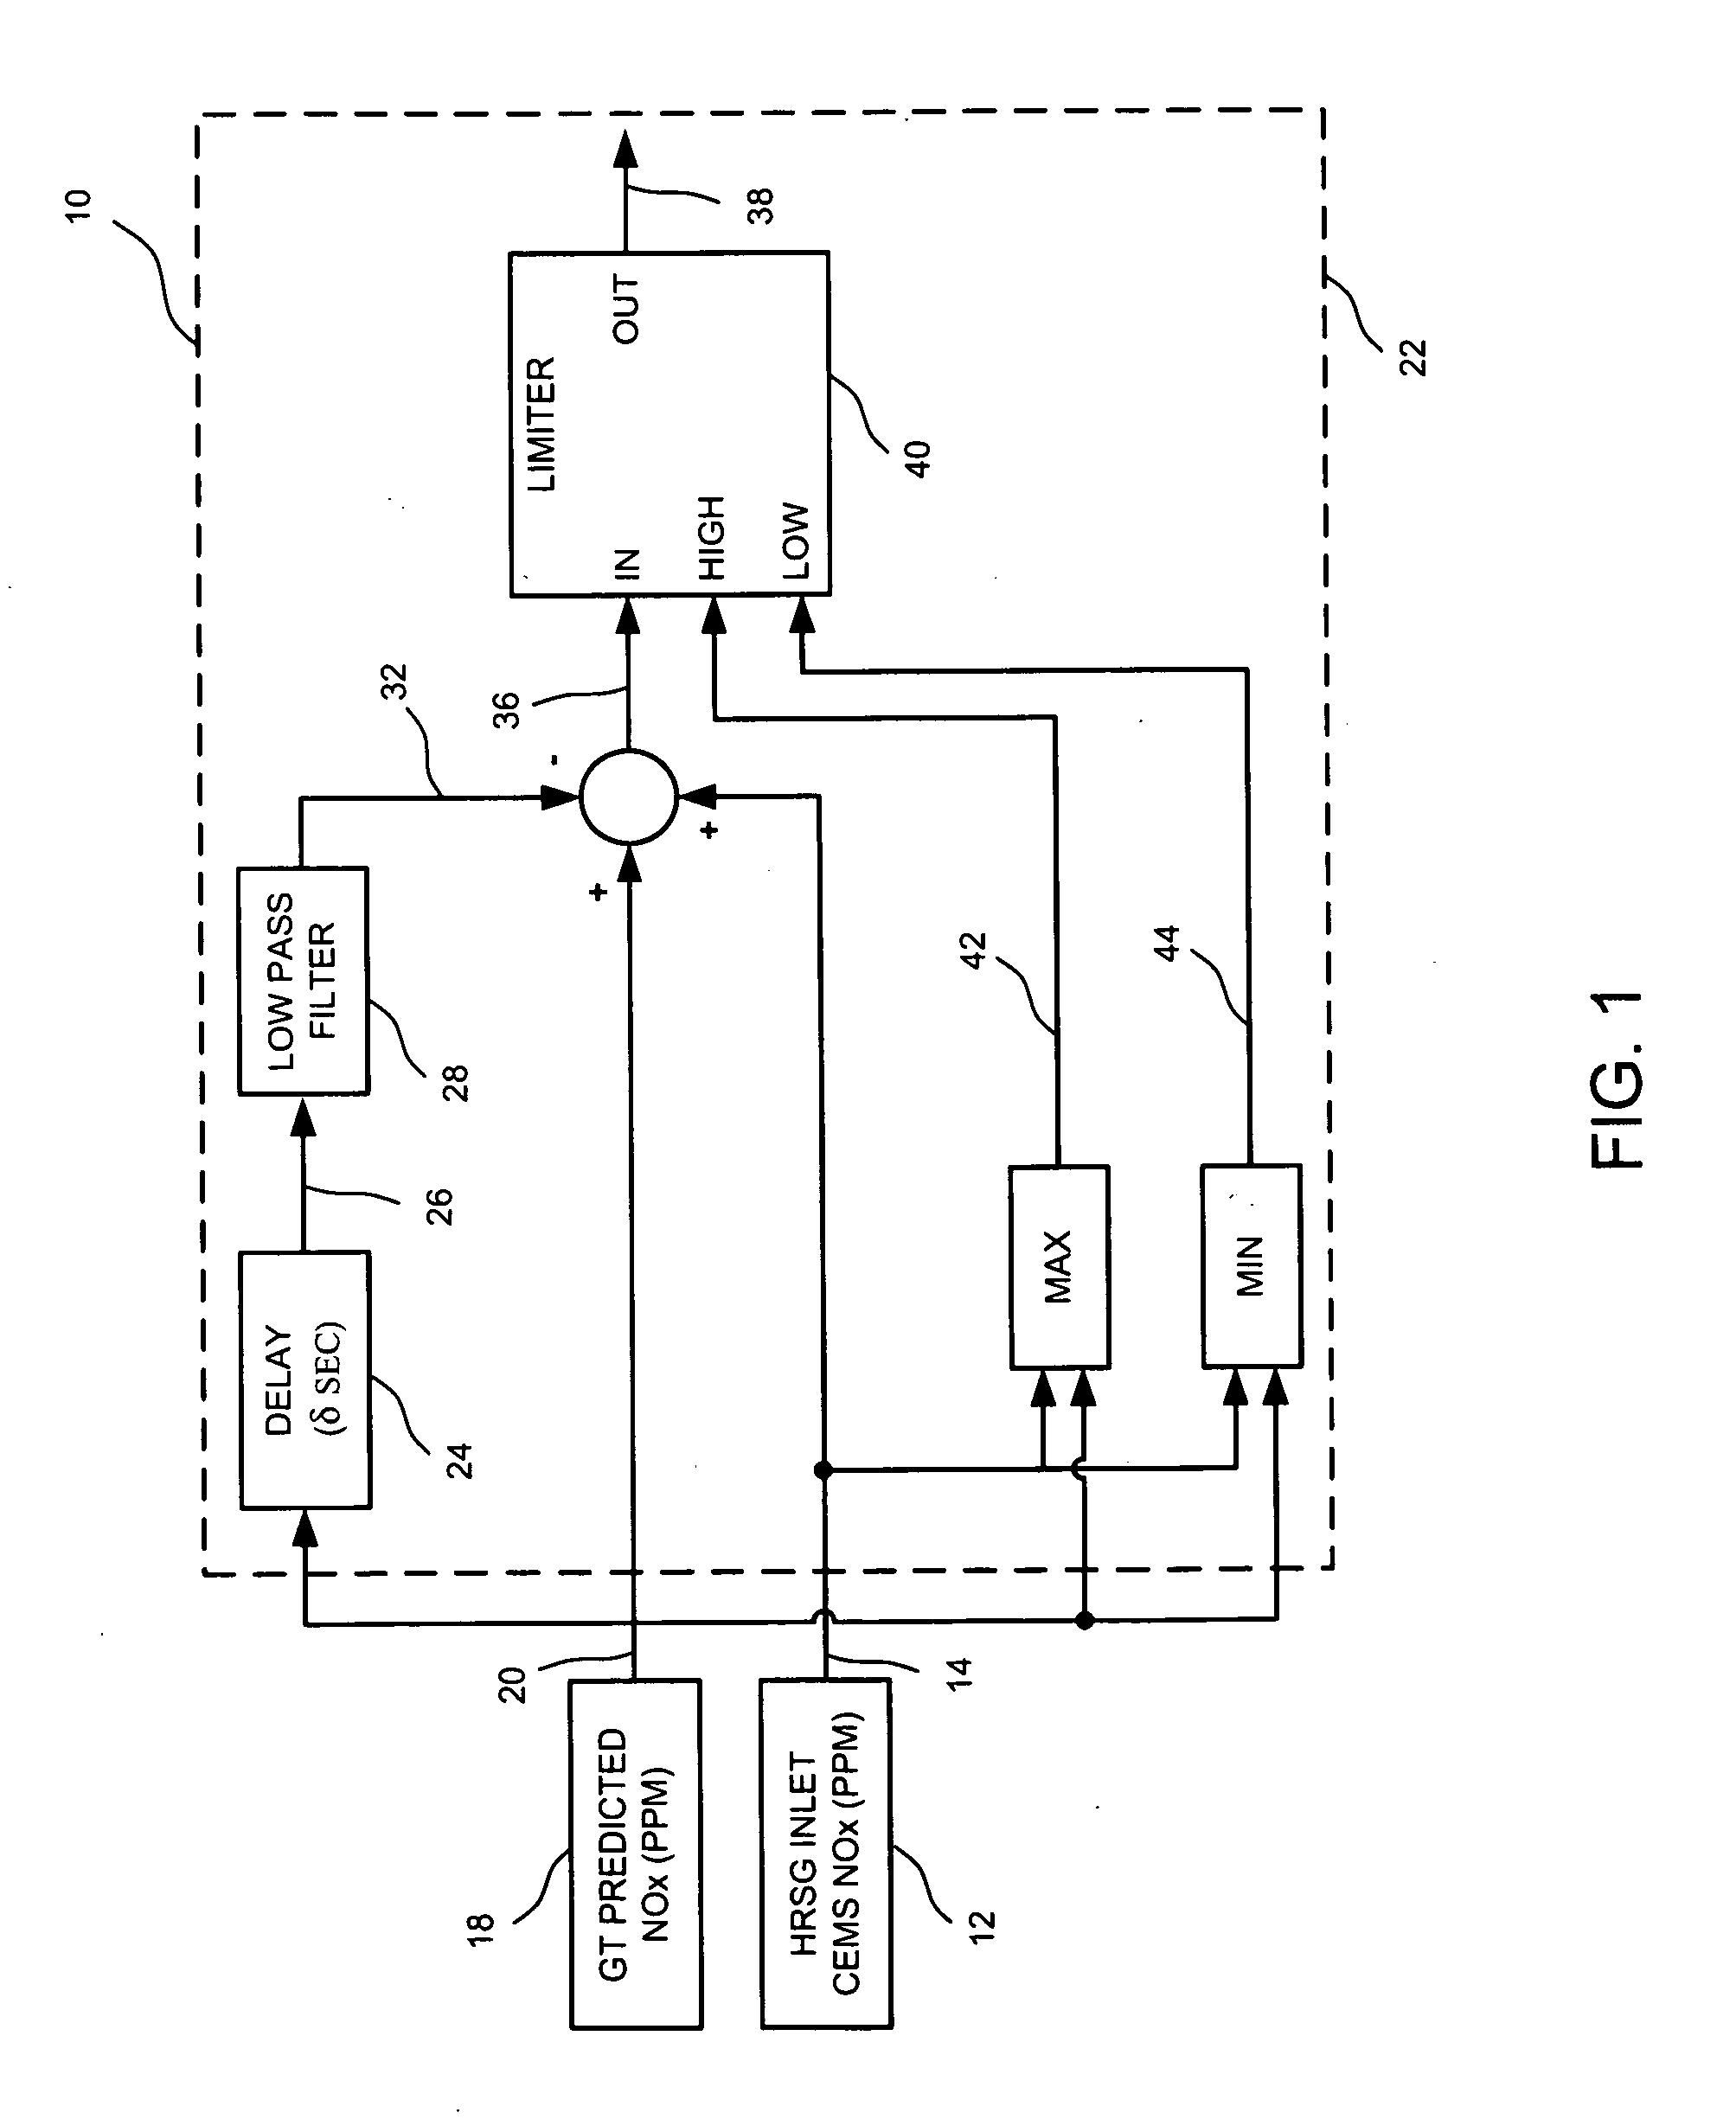 SYSTEM AND METHOD FOR OBTAINING AN OPTIMAL ESTIMATE OF NOx EMISSIONS